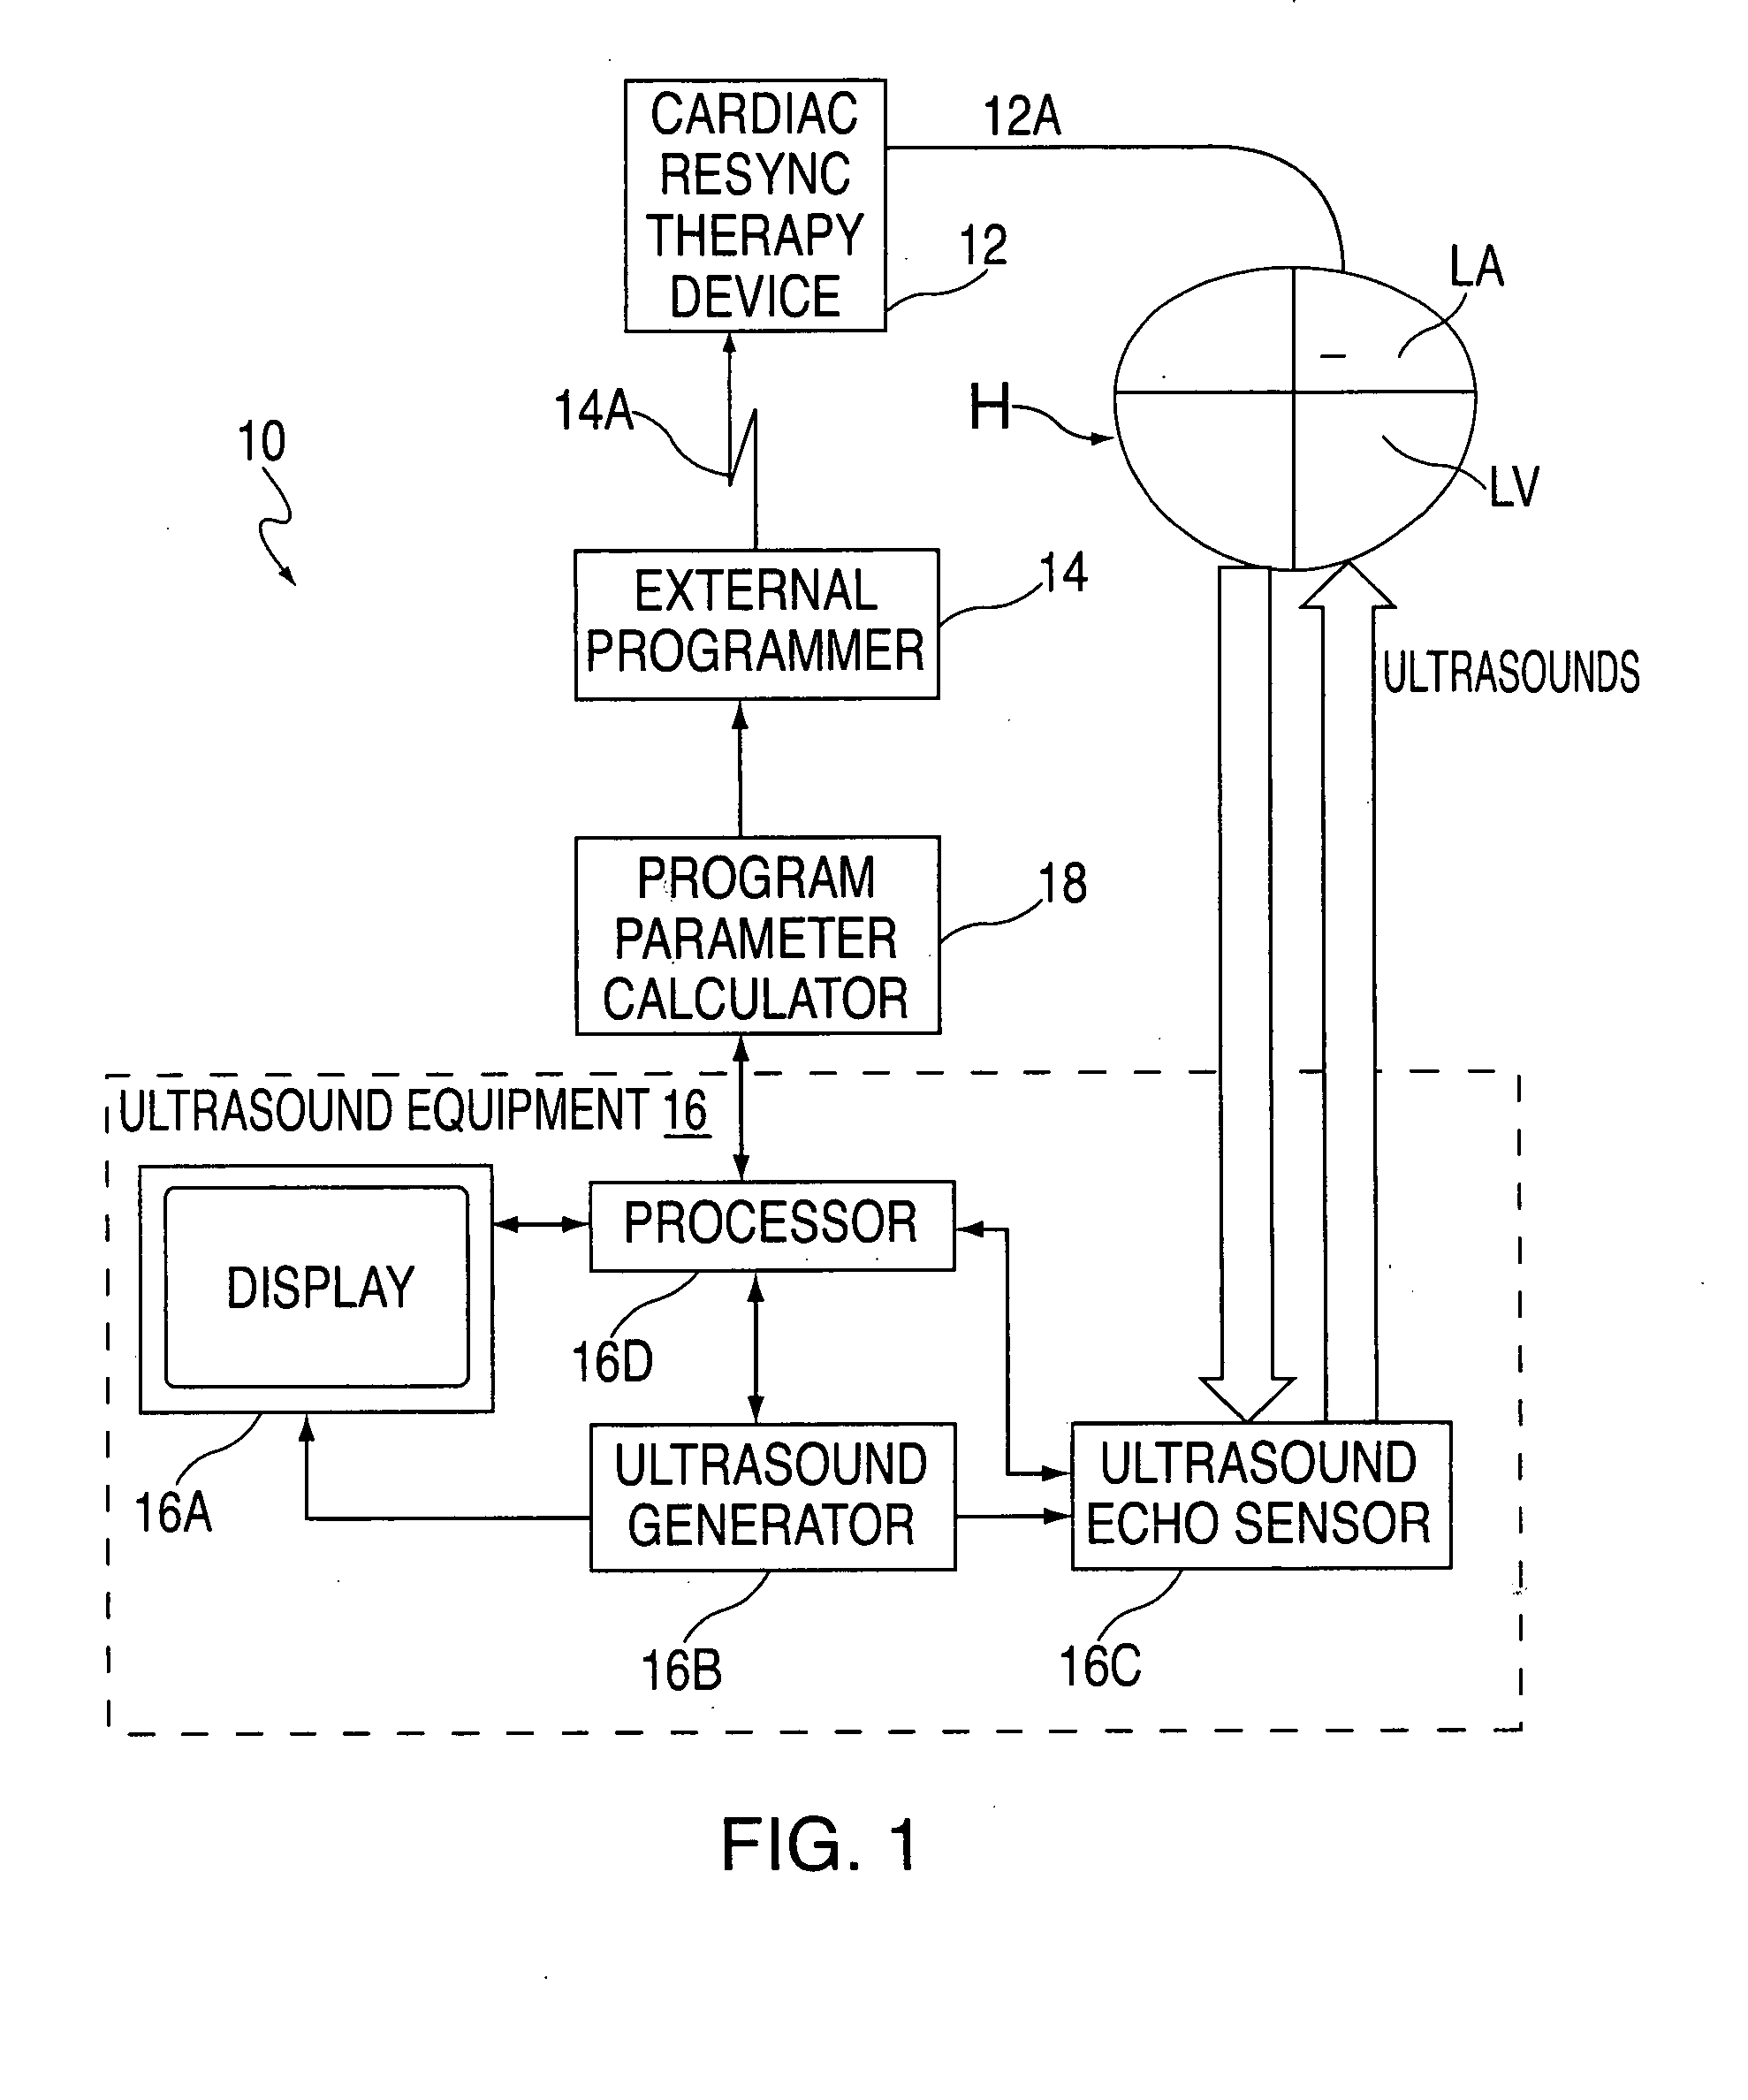 Method and apparatus for automatically programming CRT devices